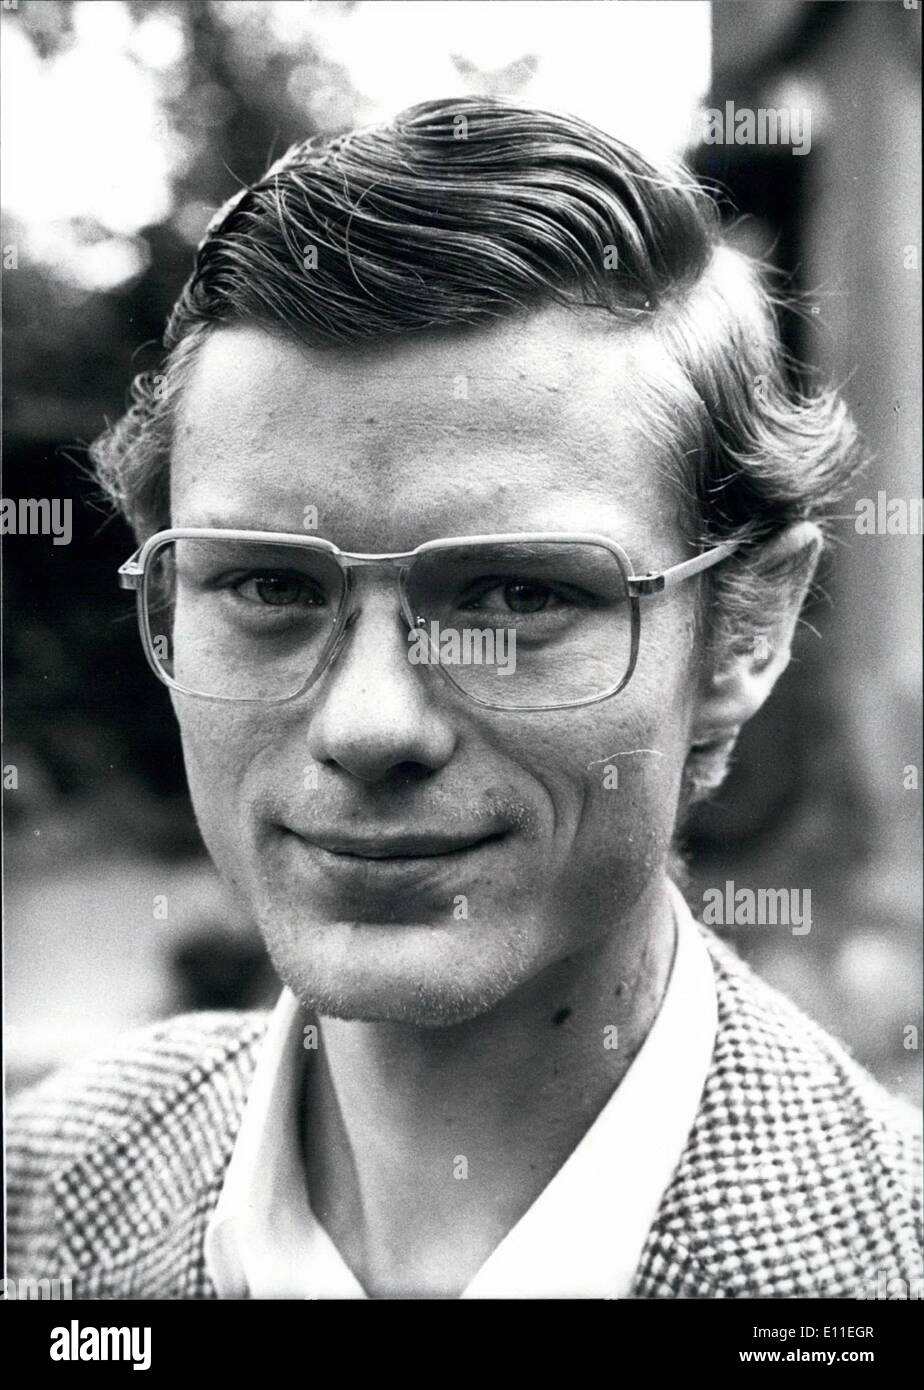 Sep. 09, 1977 - Erik von Rosen, Pilot. Von Rosen's father was count Carl Gustaf Von Rosen. The man who headed the Biafran air force during the Biafran Conflict. Later, Erik flew under his father in Ethiopia trying to stem the famine with airdrops in the inaccessible mountain regions. Count Carl Gustaf was killed in a Guerilla attack a couple of months ago, but Erik is determined to continue the work. Stock Photo